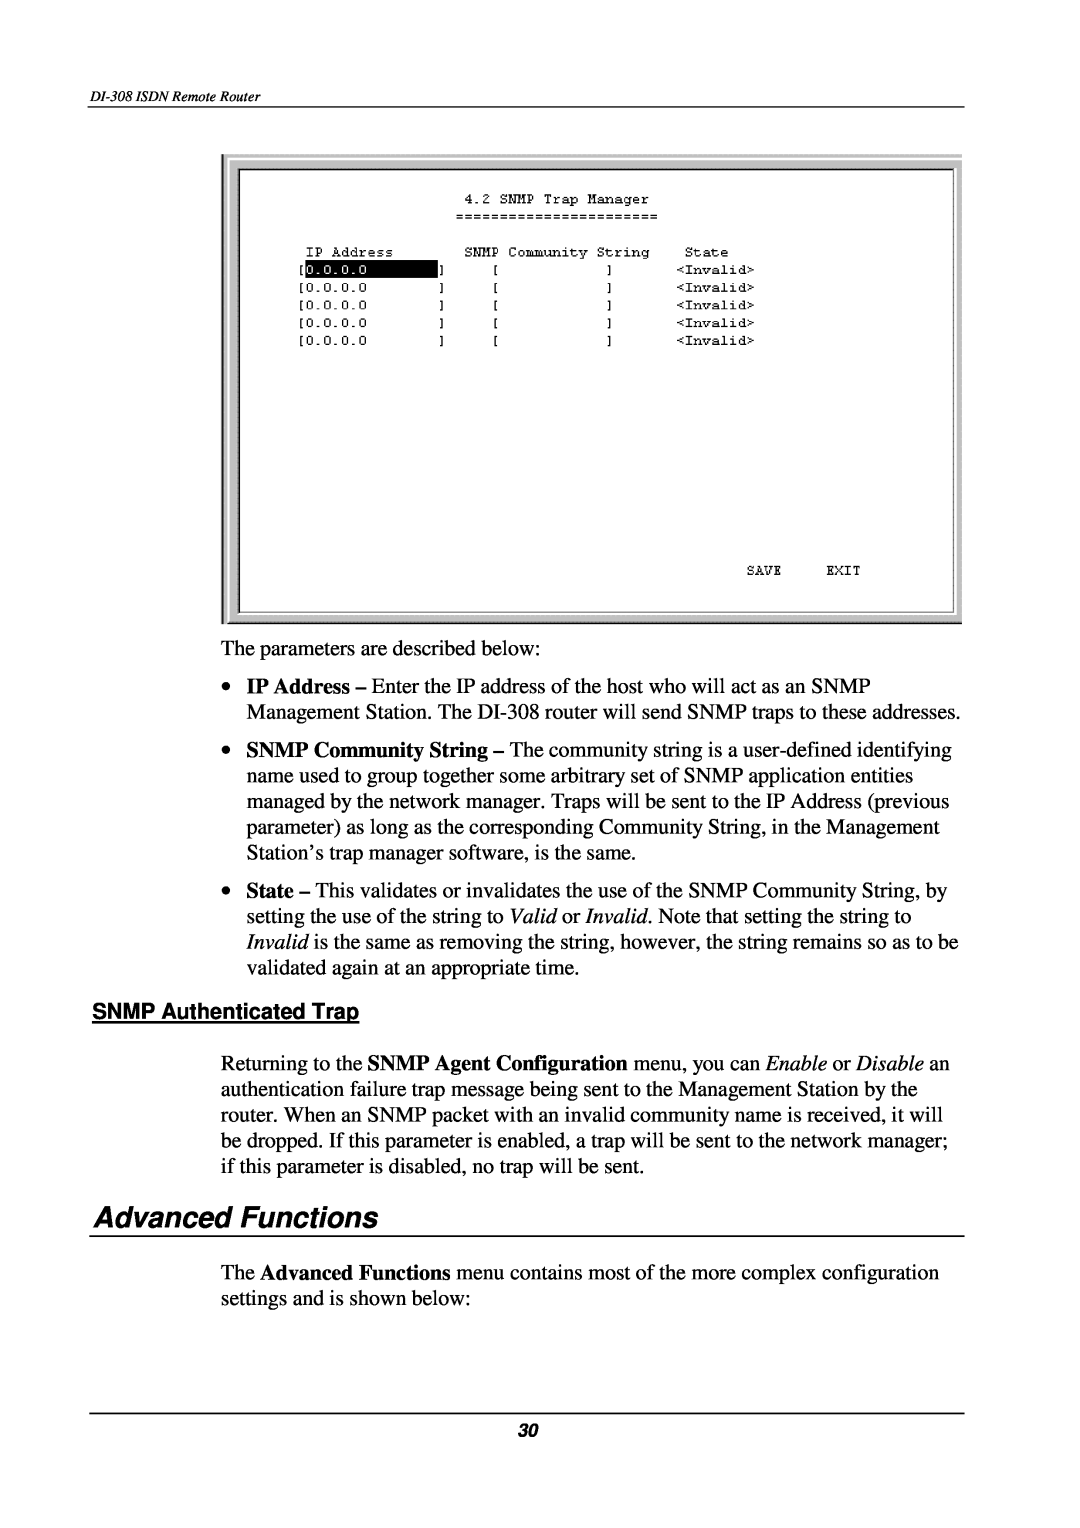 D-Link DI-308 manual Advanced Functions, SNMP Authenticated Trap 